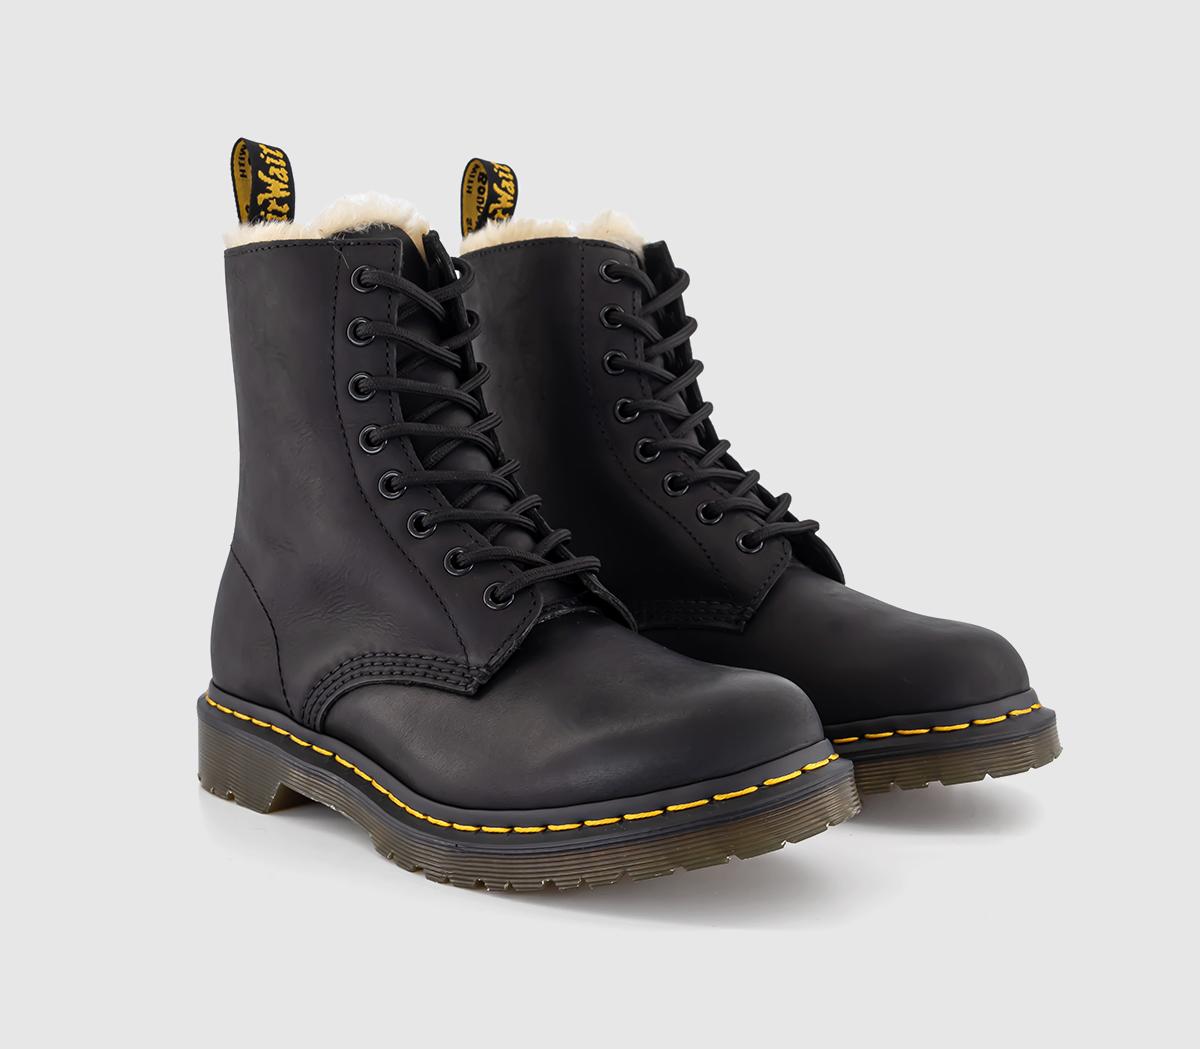 Dr. Martens Serena 8 Eyelet Boots Black Leather - Women's Ankle Boots